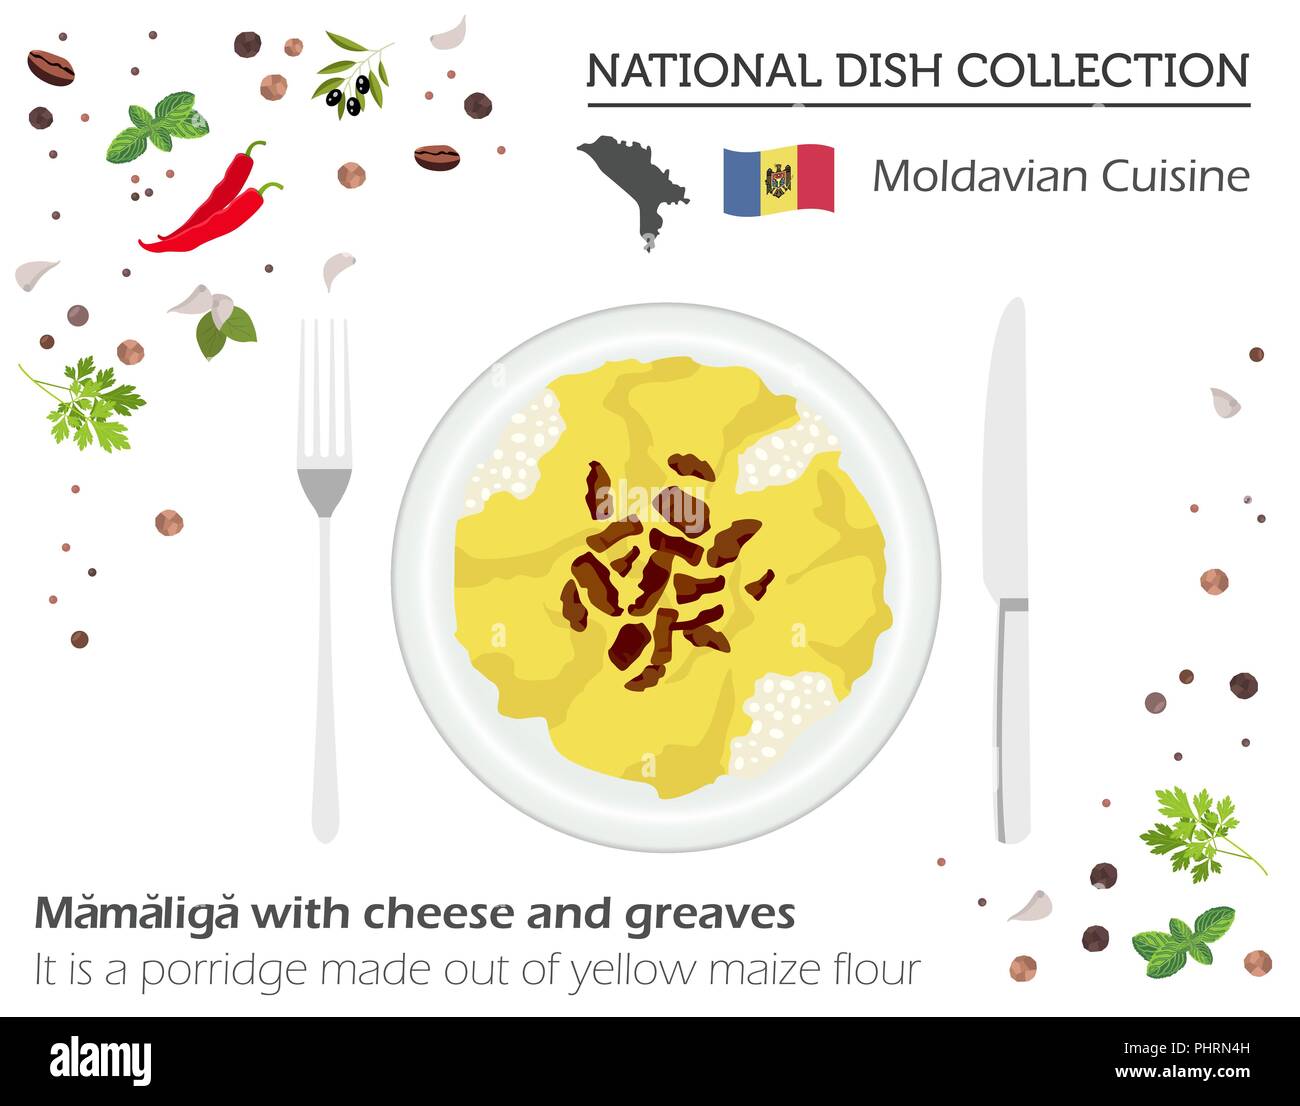 Moldova Cuisine. European national dish collection. Moldavian mamaliga with cheese and greaves isolated on white, infographic. Vector illustration Stock Vector